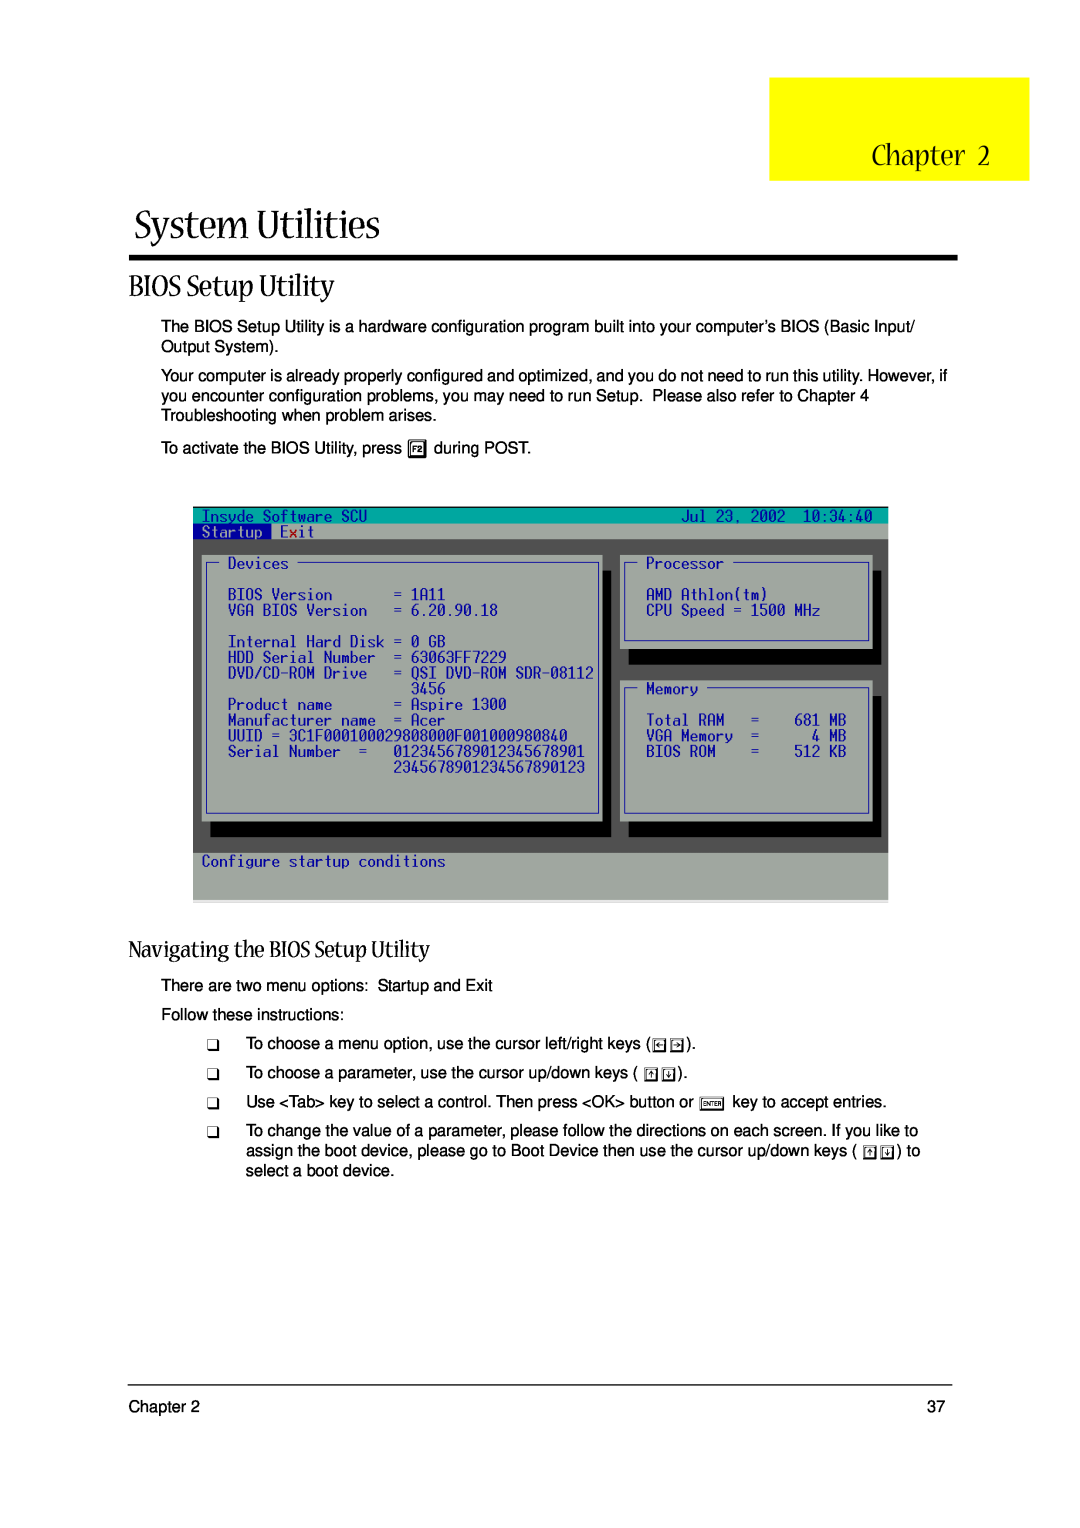 Acer 1300 Series manual System Utilities, Navigating the BIOS Setup Utility, Chapter 